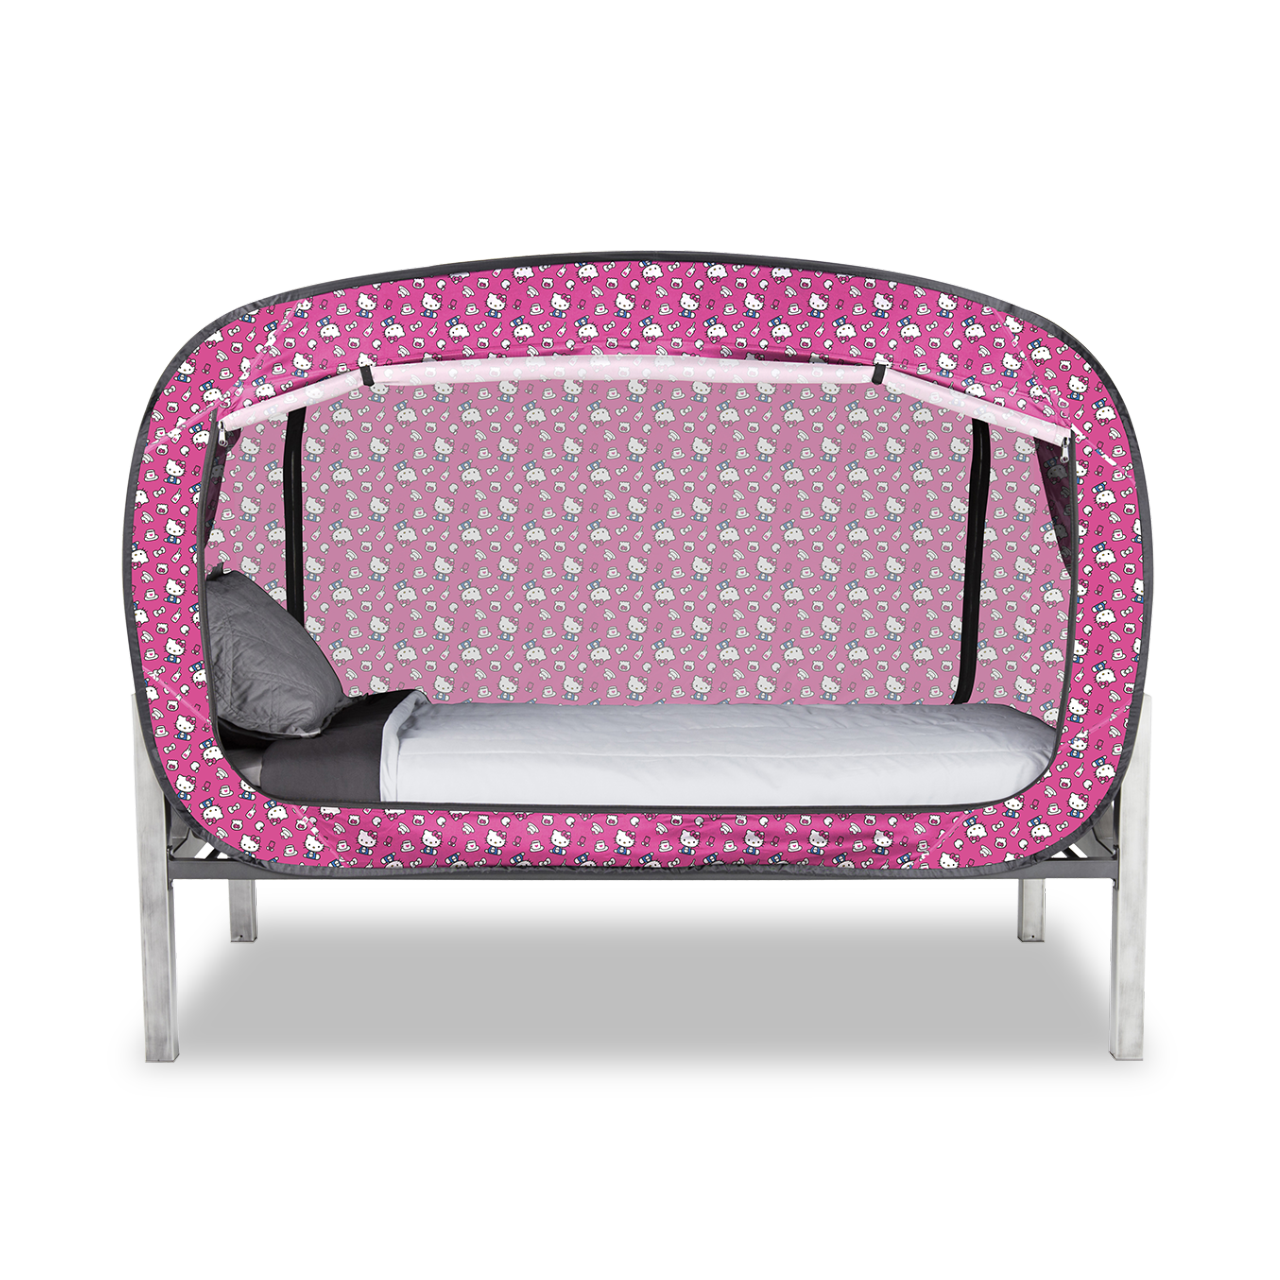 Privacy Pop bed tent -- Hello Kitty! | Bed tent, Fall ... - Hello Kitty Room Ideas